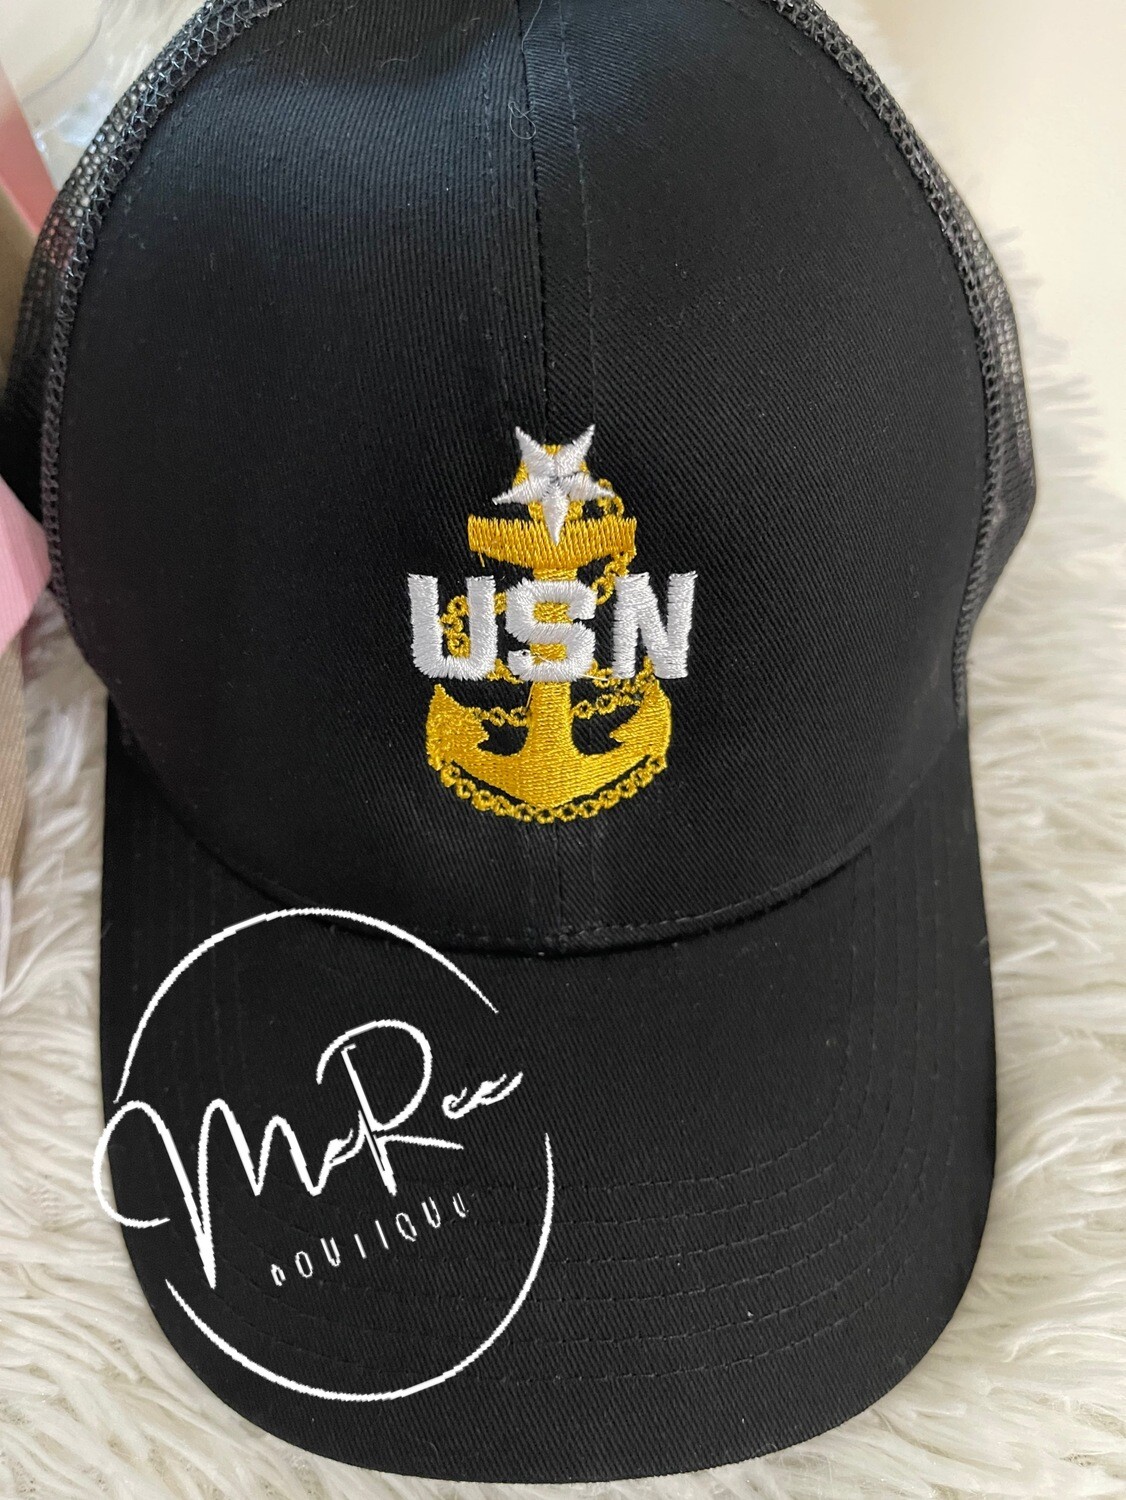 Black “Dad Hat” Embroidered ❤️ USN and Stars if applicable are embroidered in white.) 🧢please allow 4-6 business days to ship once ordered is placed. (USN and Stars